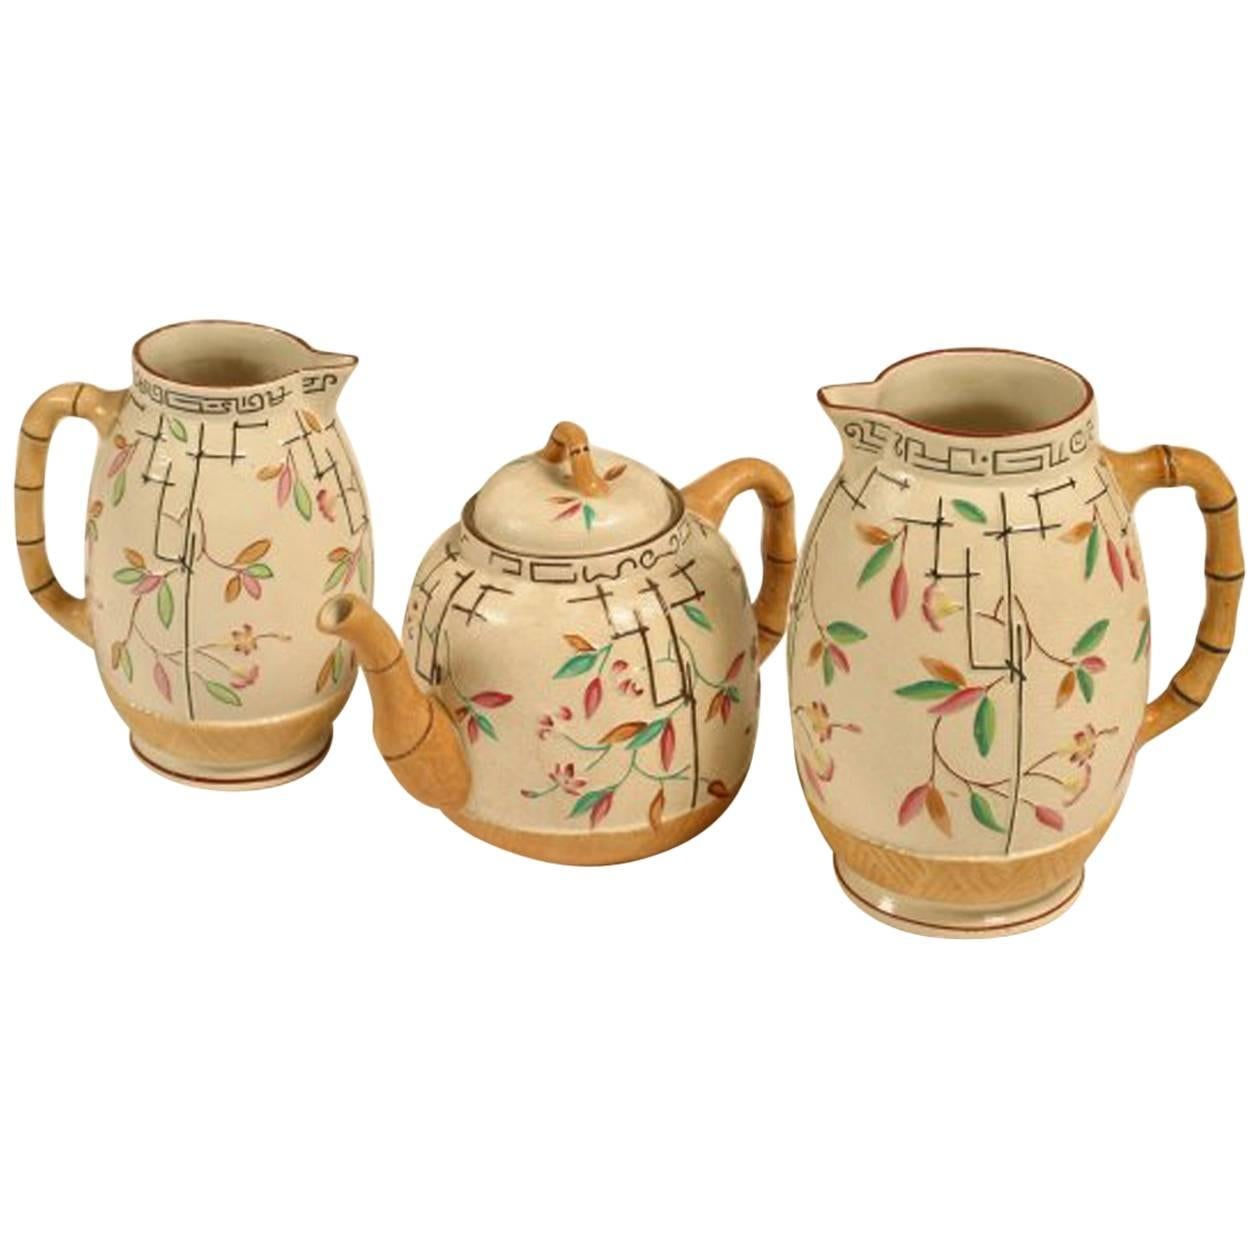 China Teapot and Two Jugs Probably by Brown